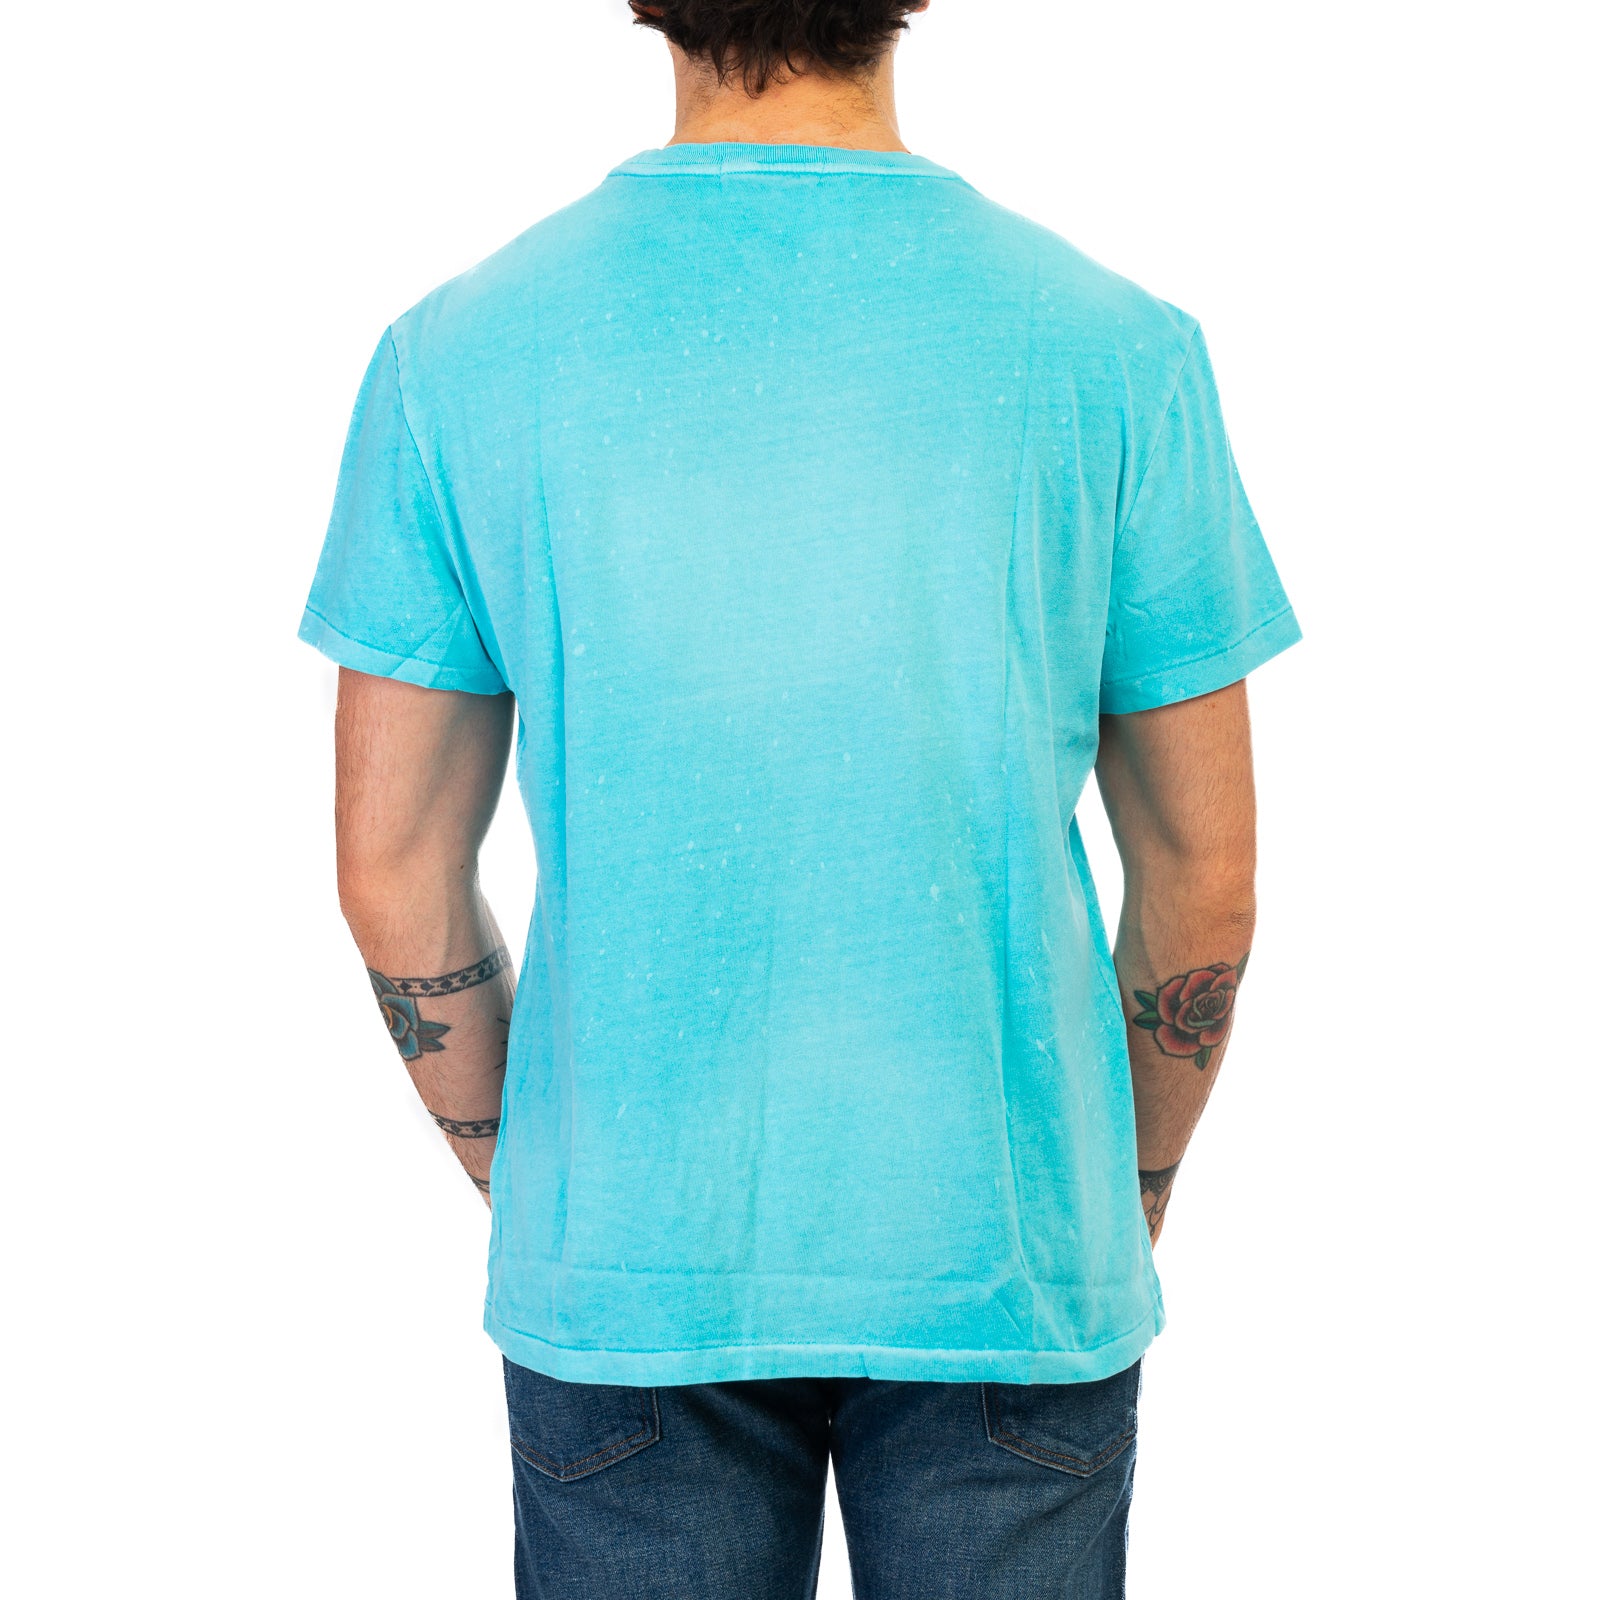 T-shirt POLO RALPH LAUREN
Perfect turquoise